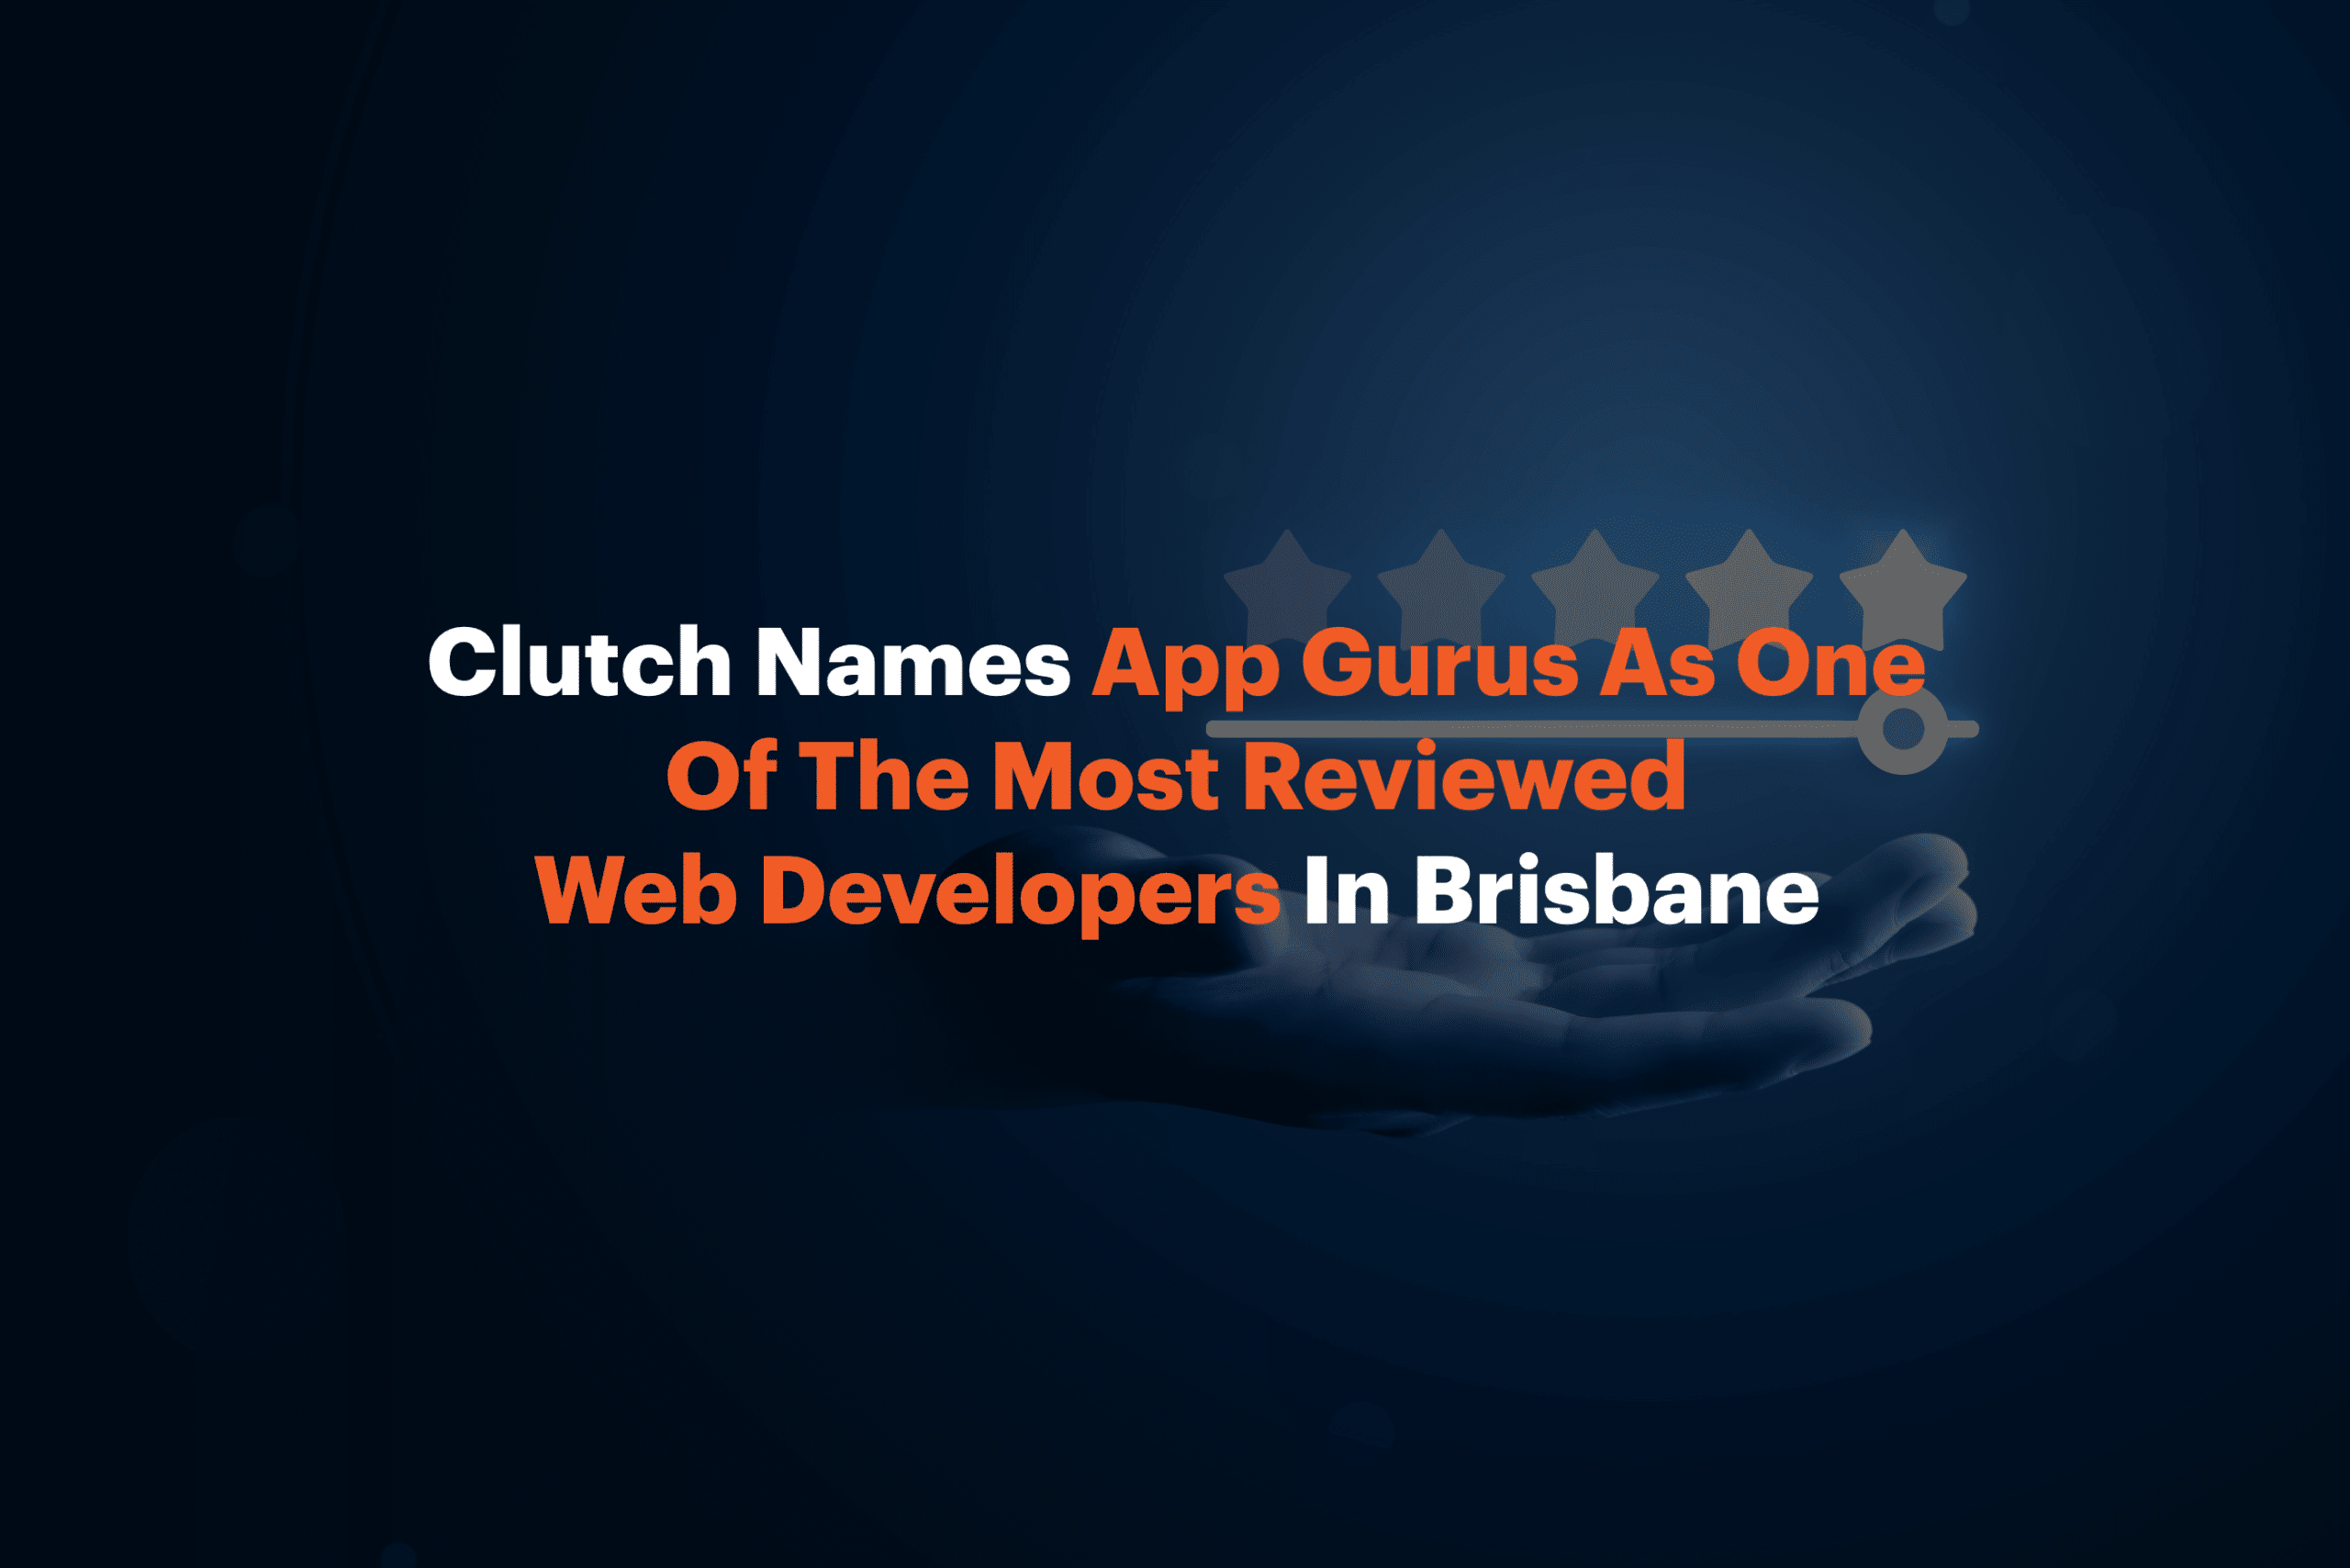 Clutch Names App Gurus As One Of The Most Reviewed Web Developers In Brisbane